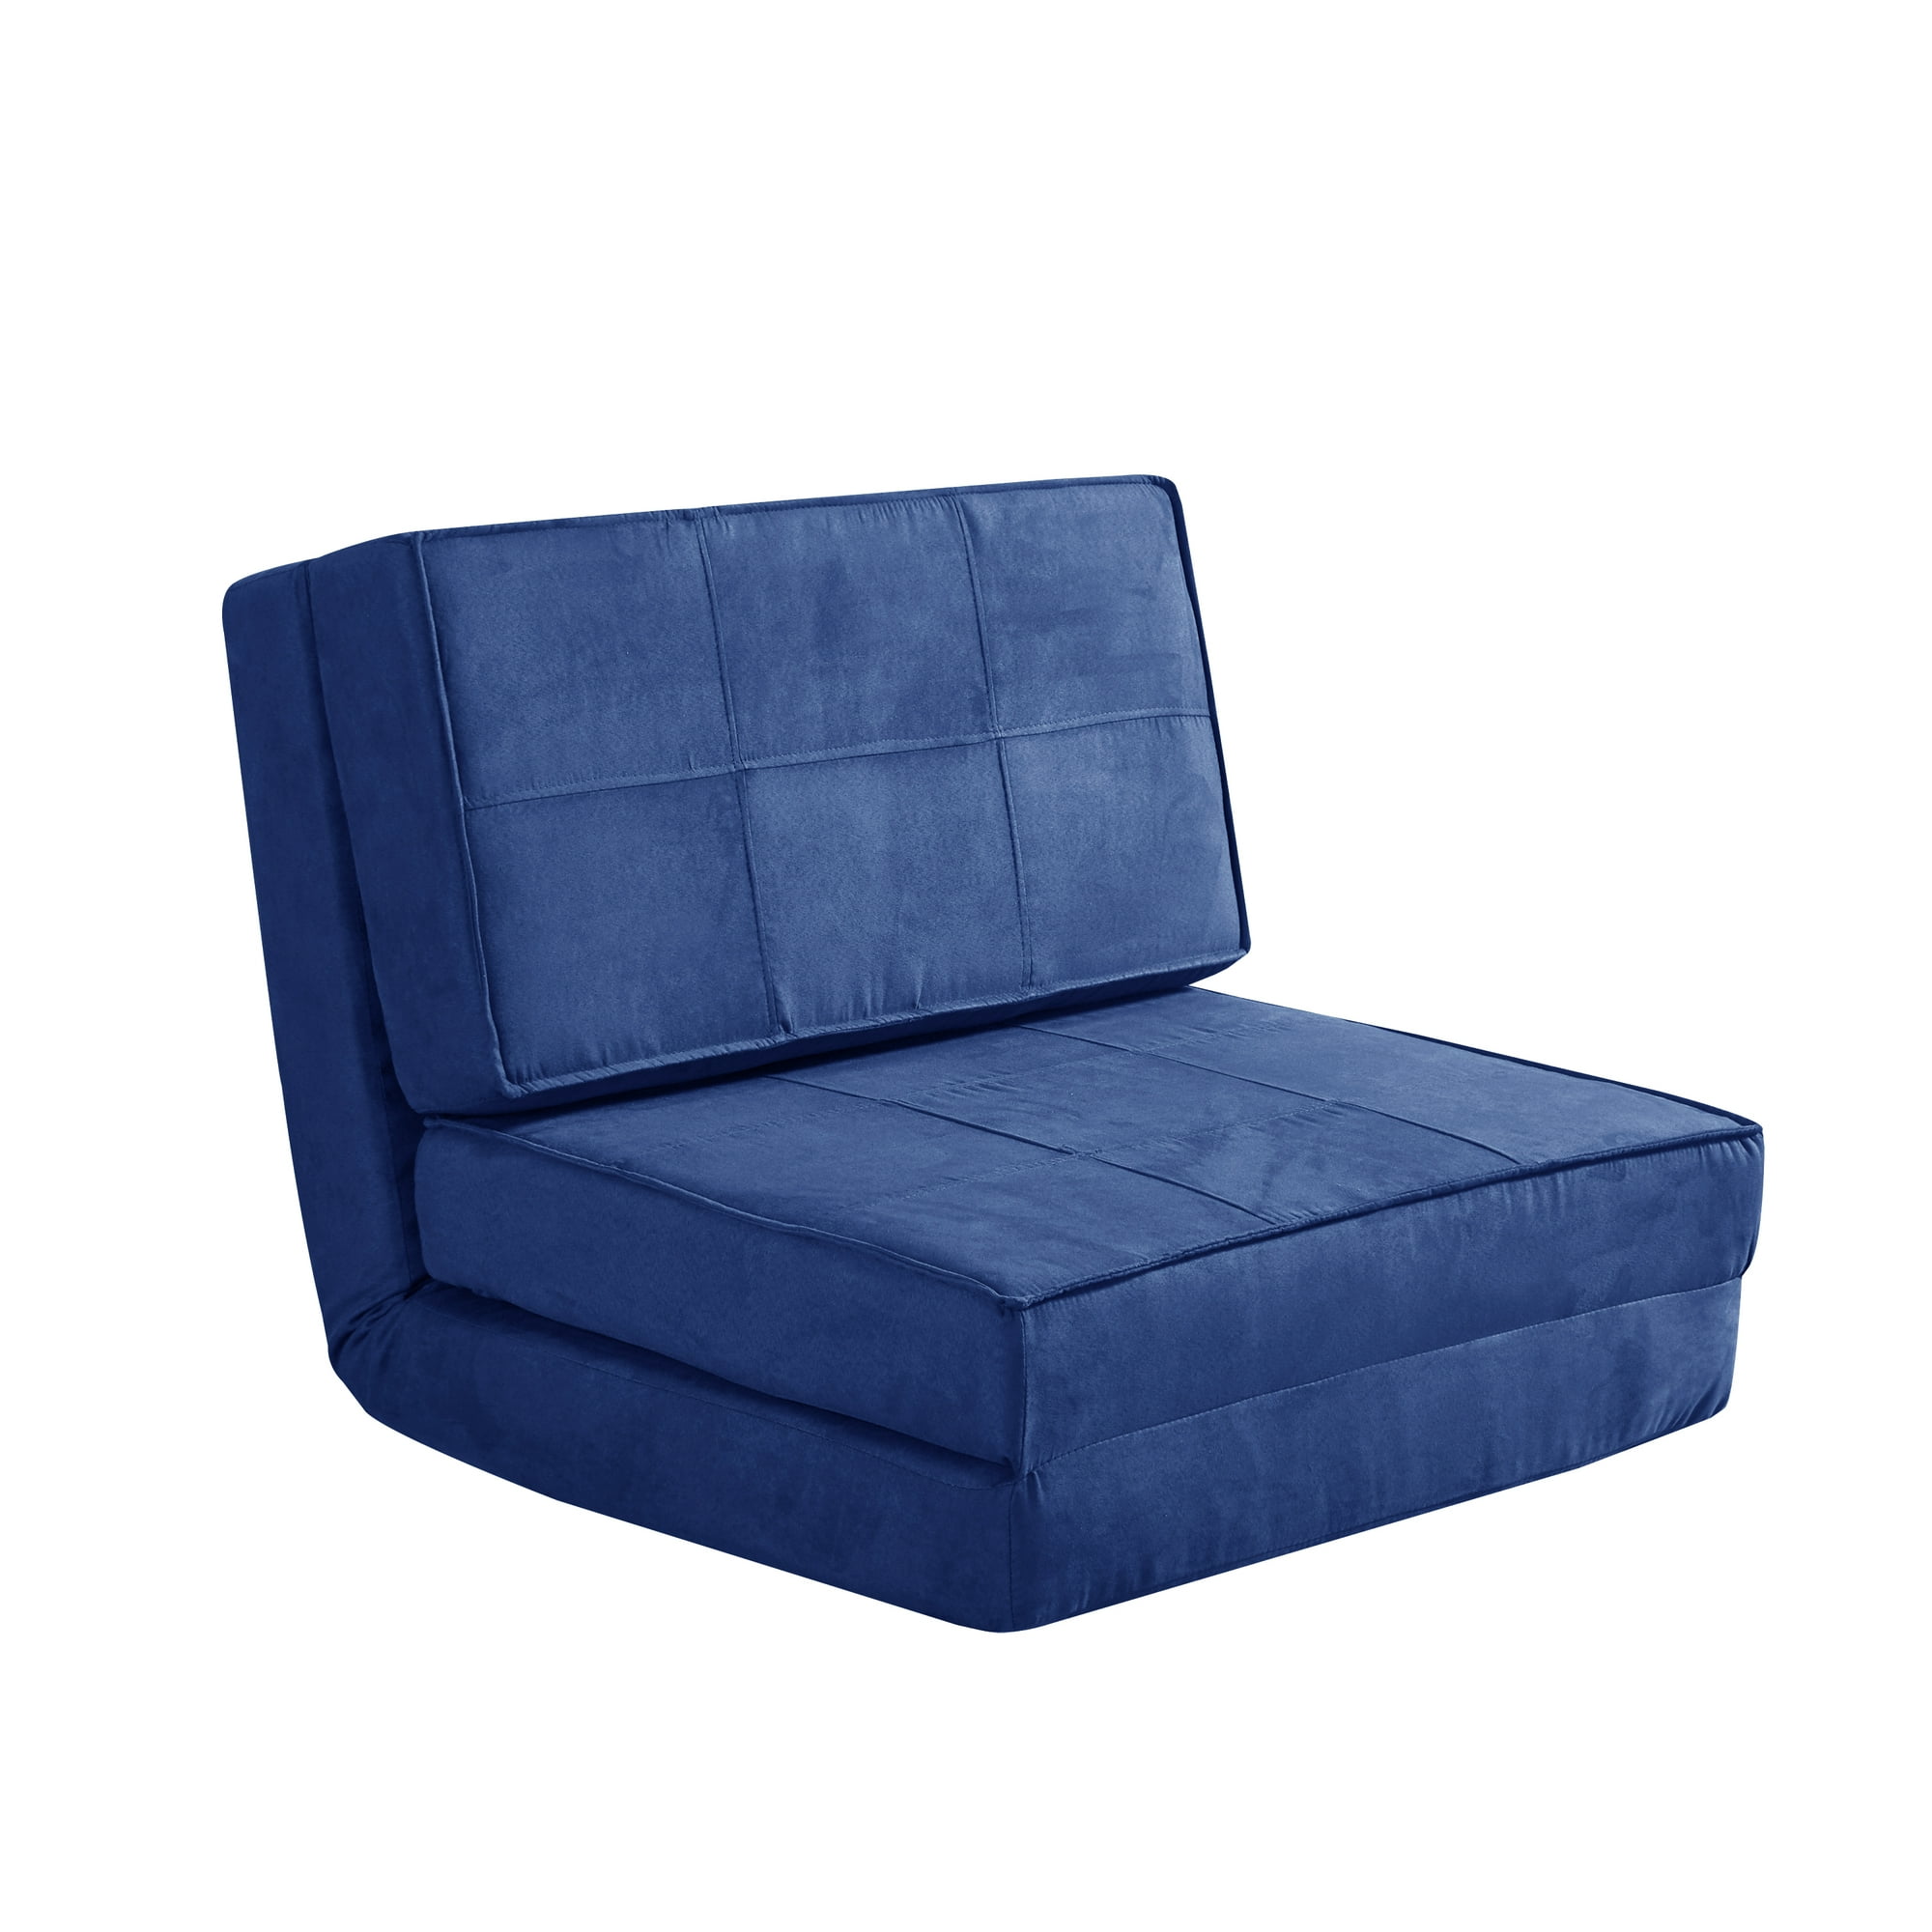 Your Zone Ultra Soft Suede 3 Position Convertible Flip Lounge Chair, Blue